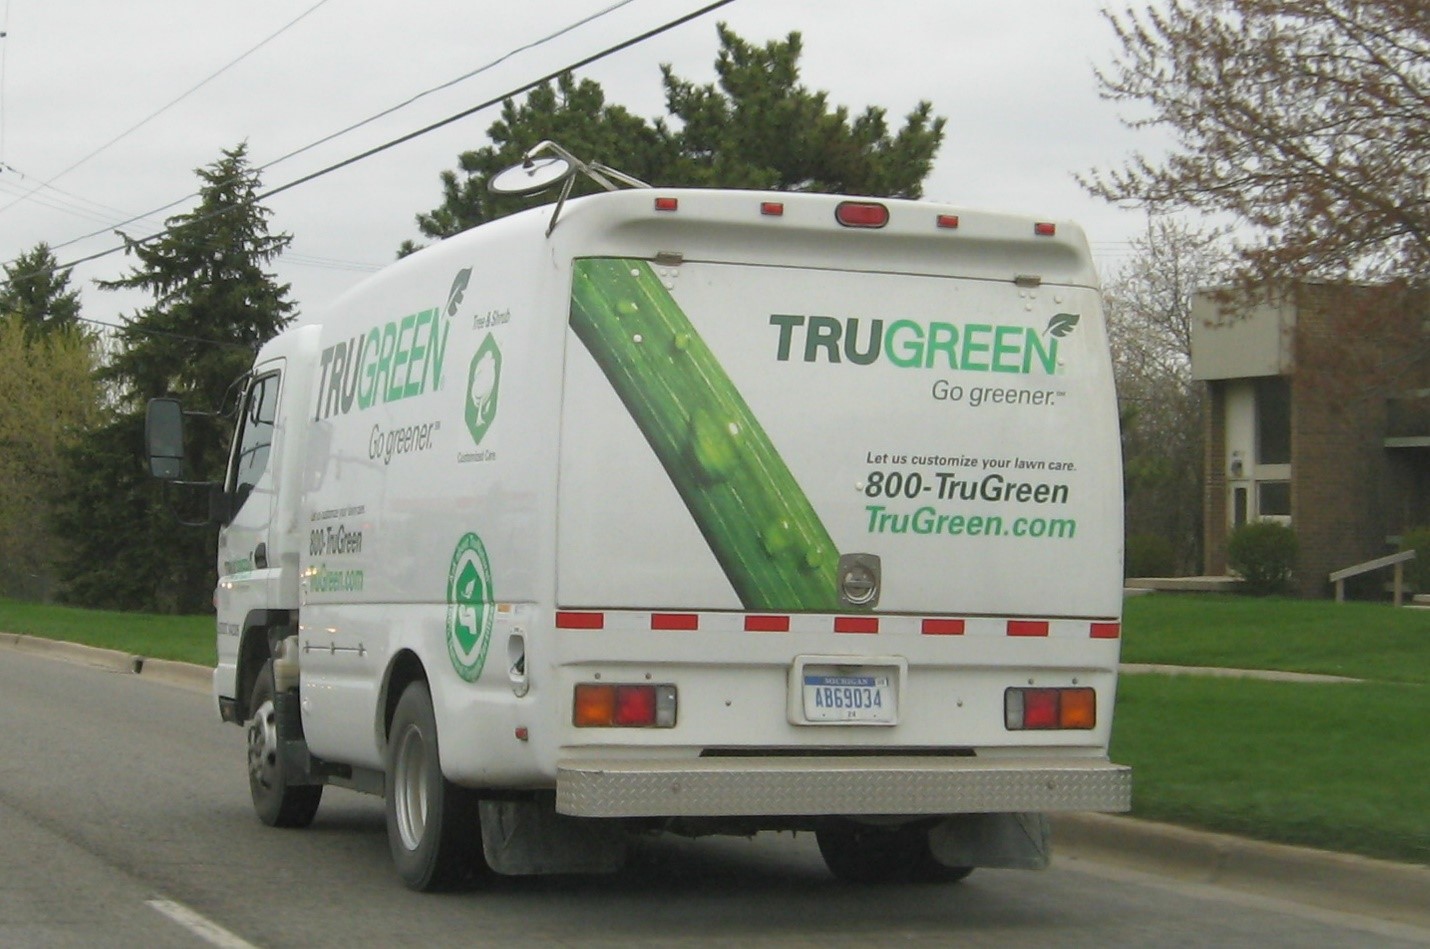 How Much Does TruGreen Cost